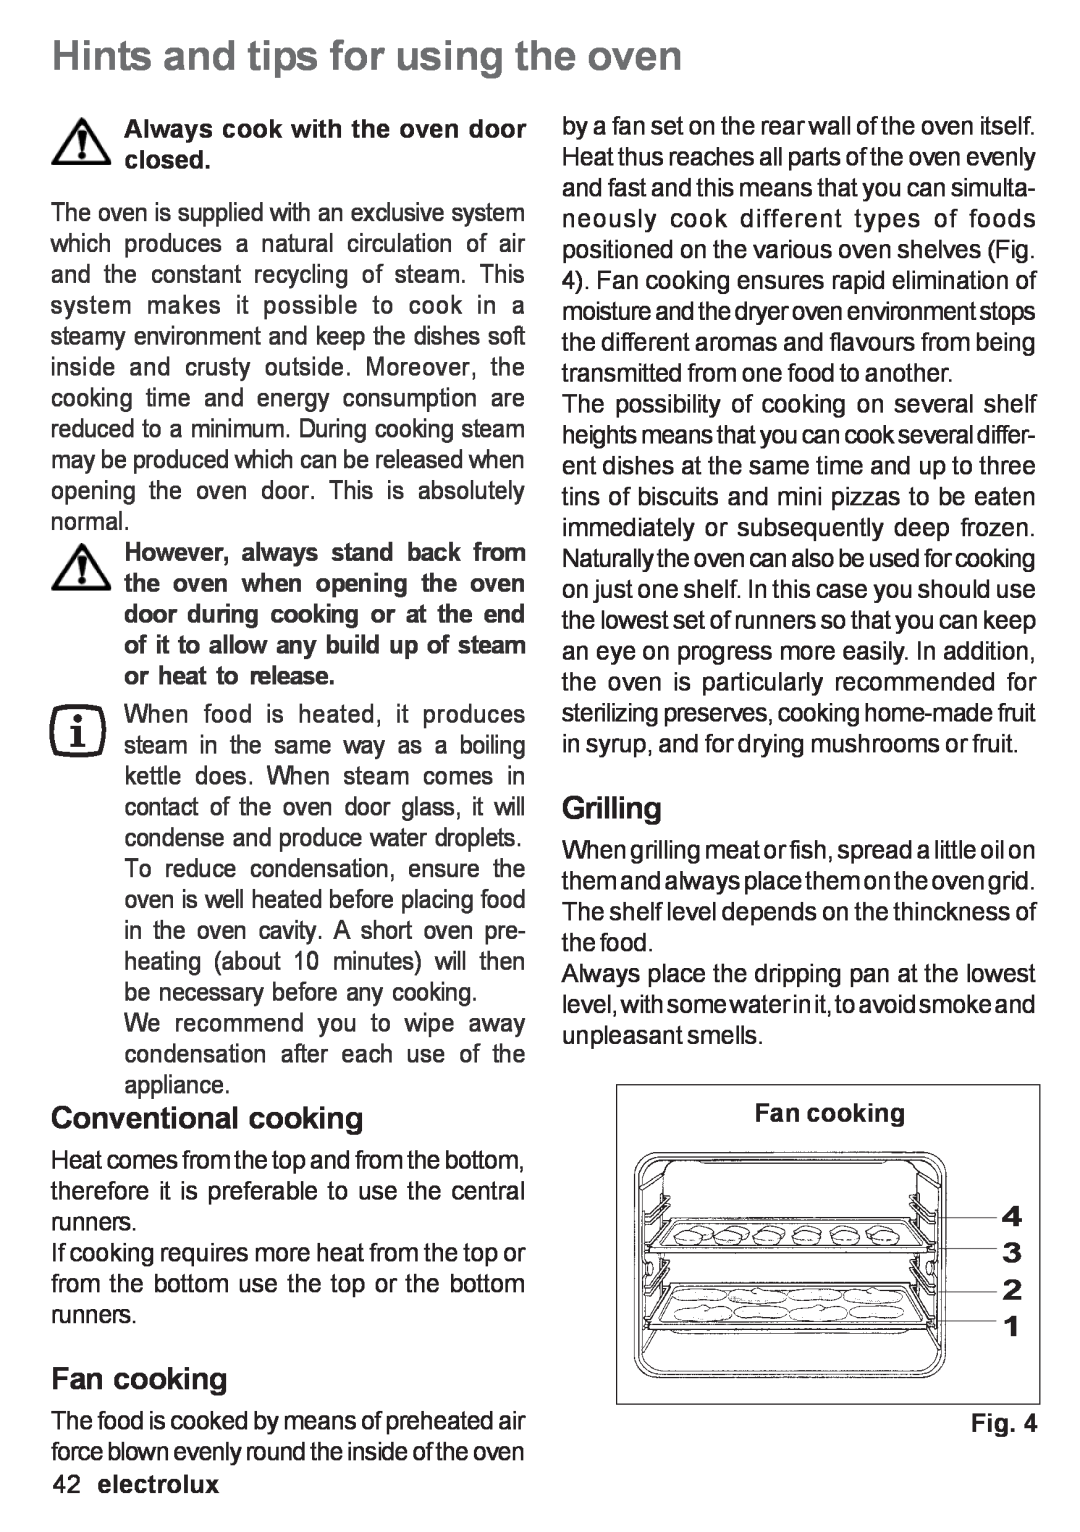 Electrolux EOB 53003 user manual Hints and tips for using the oven, Conventional cooking, Fan cooking, Grilling, electrolux 